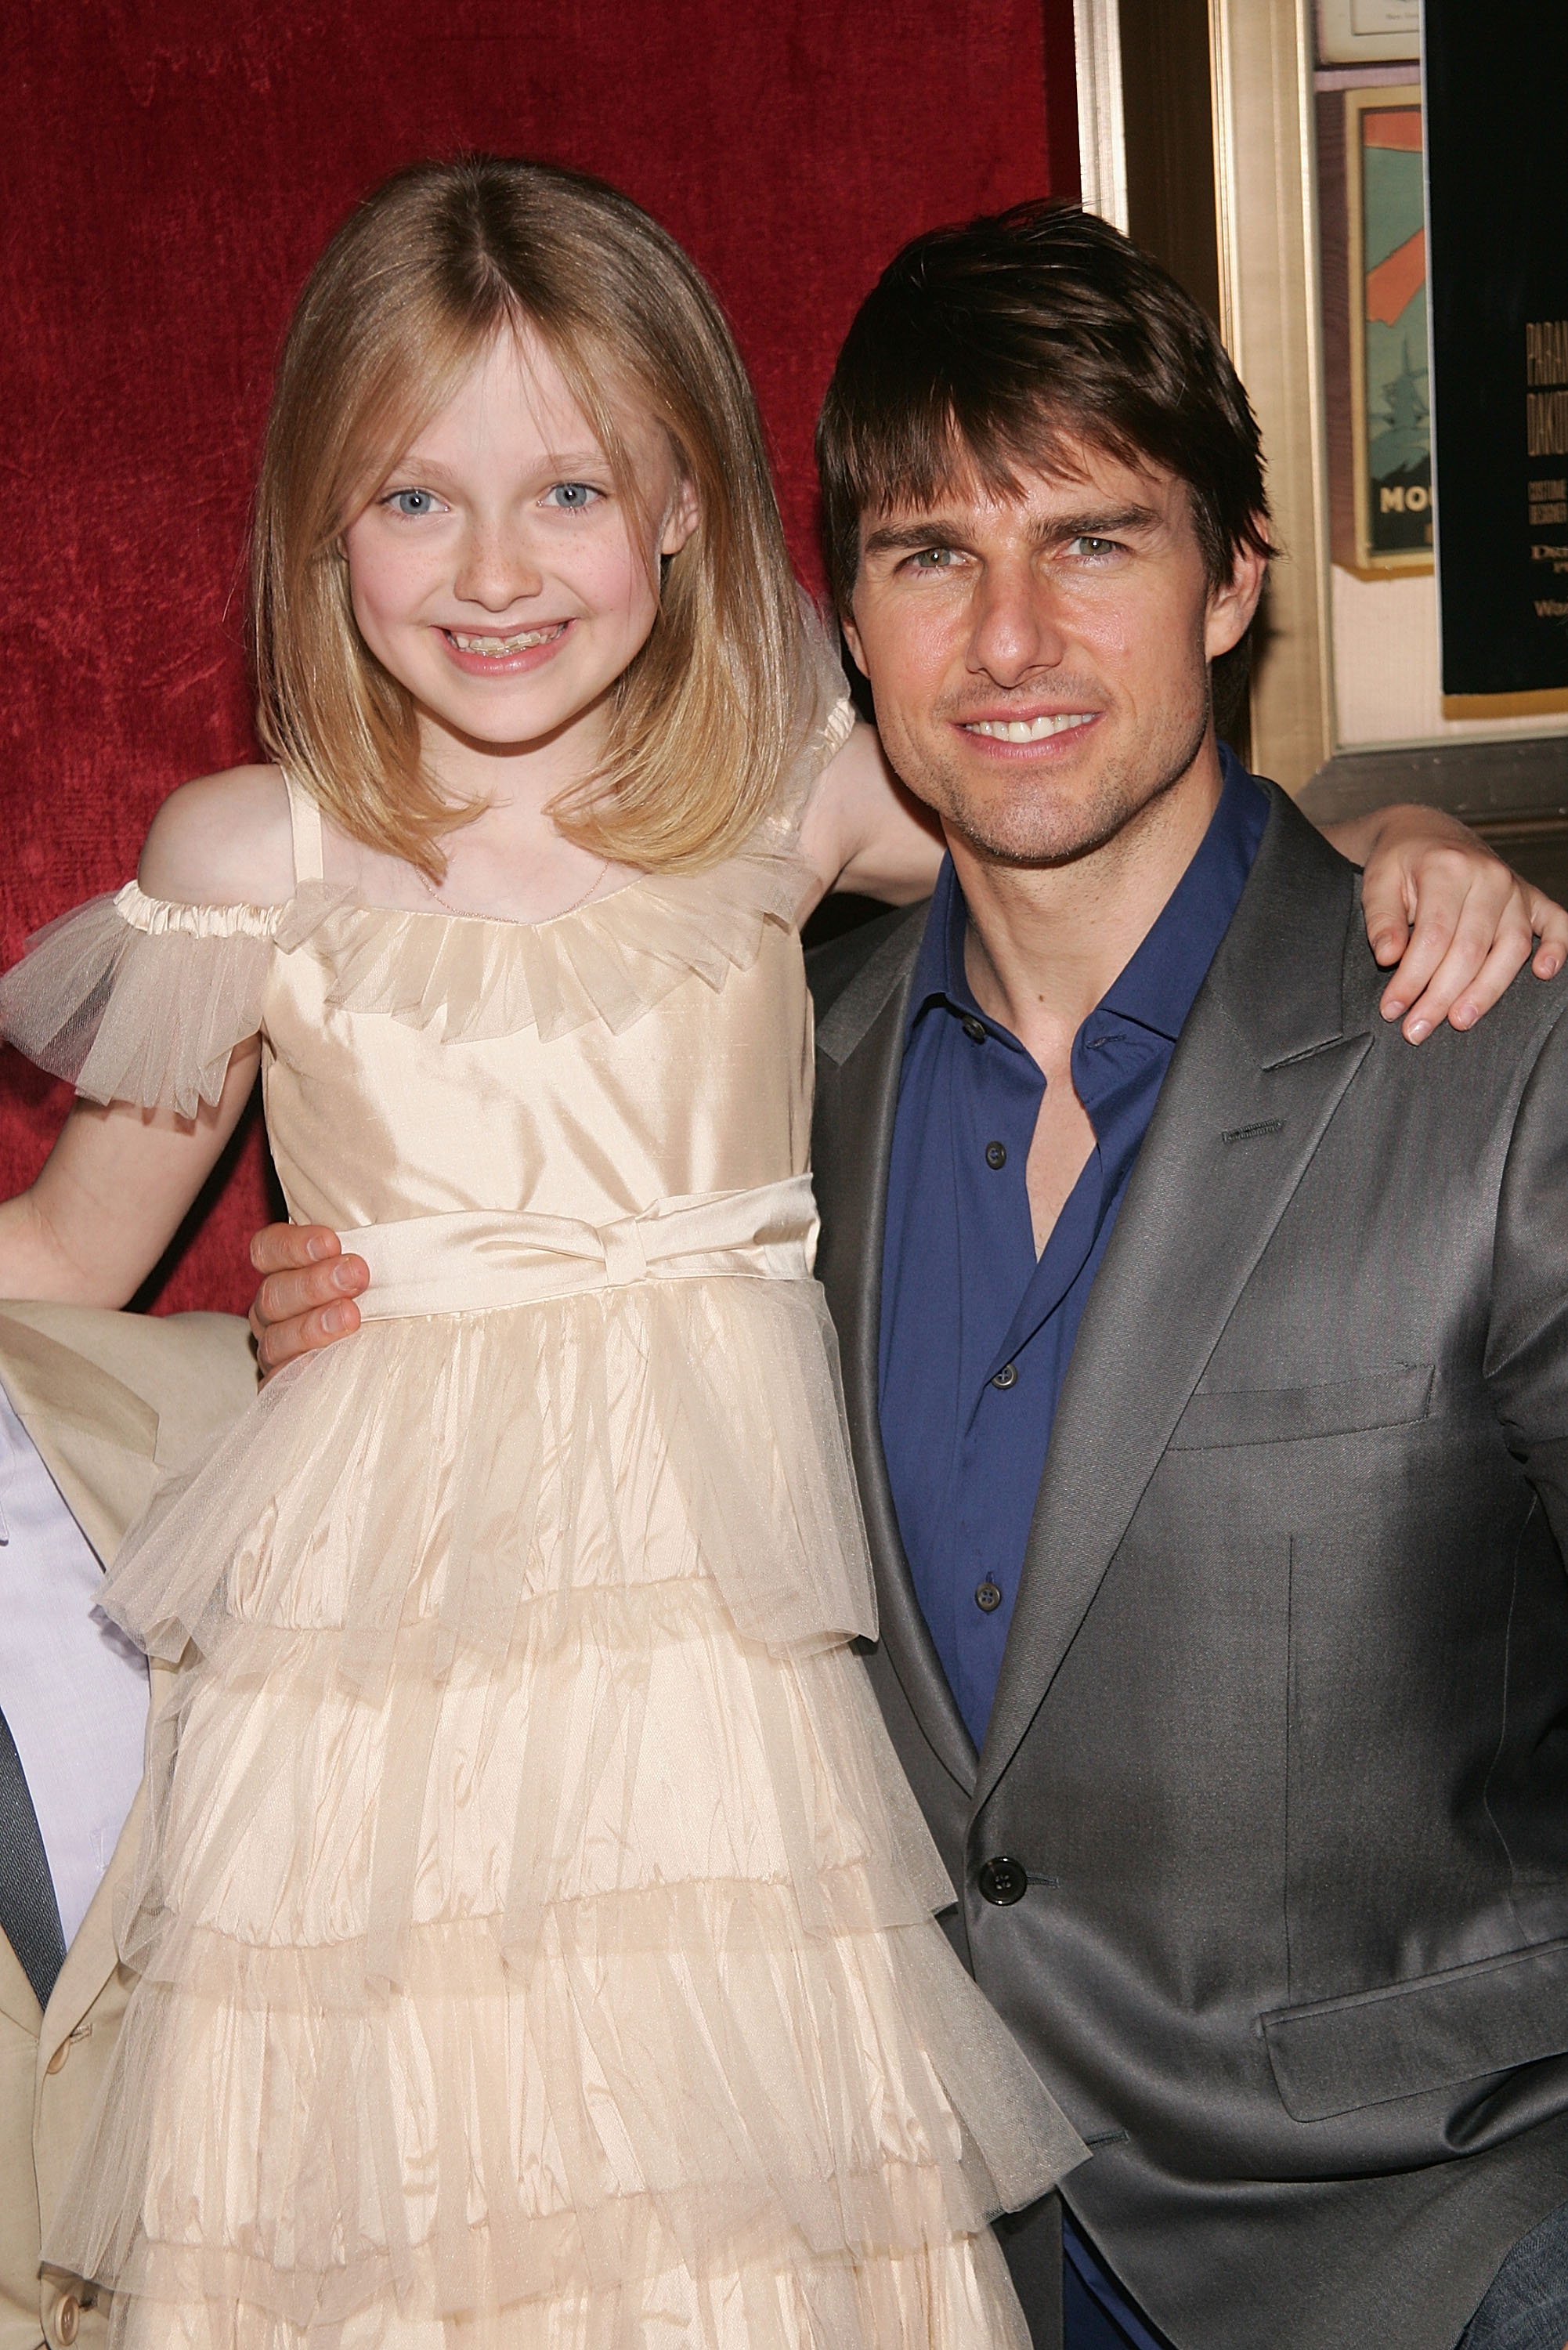 Dakota Fanning and Tom Cruise at the premiere of "War of The Worlds" on June 23, 2005, in New York City. | Source: Getty Images